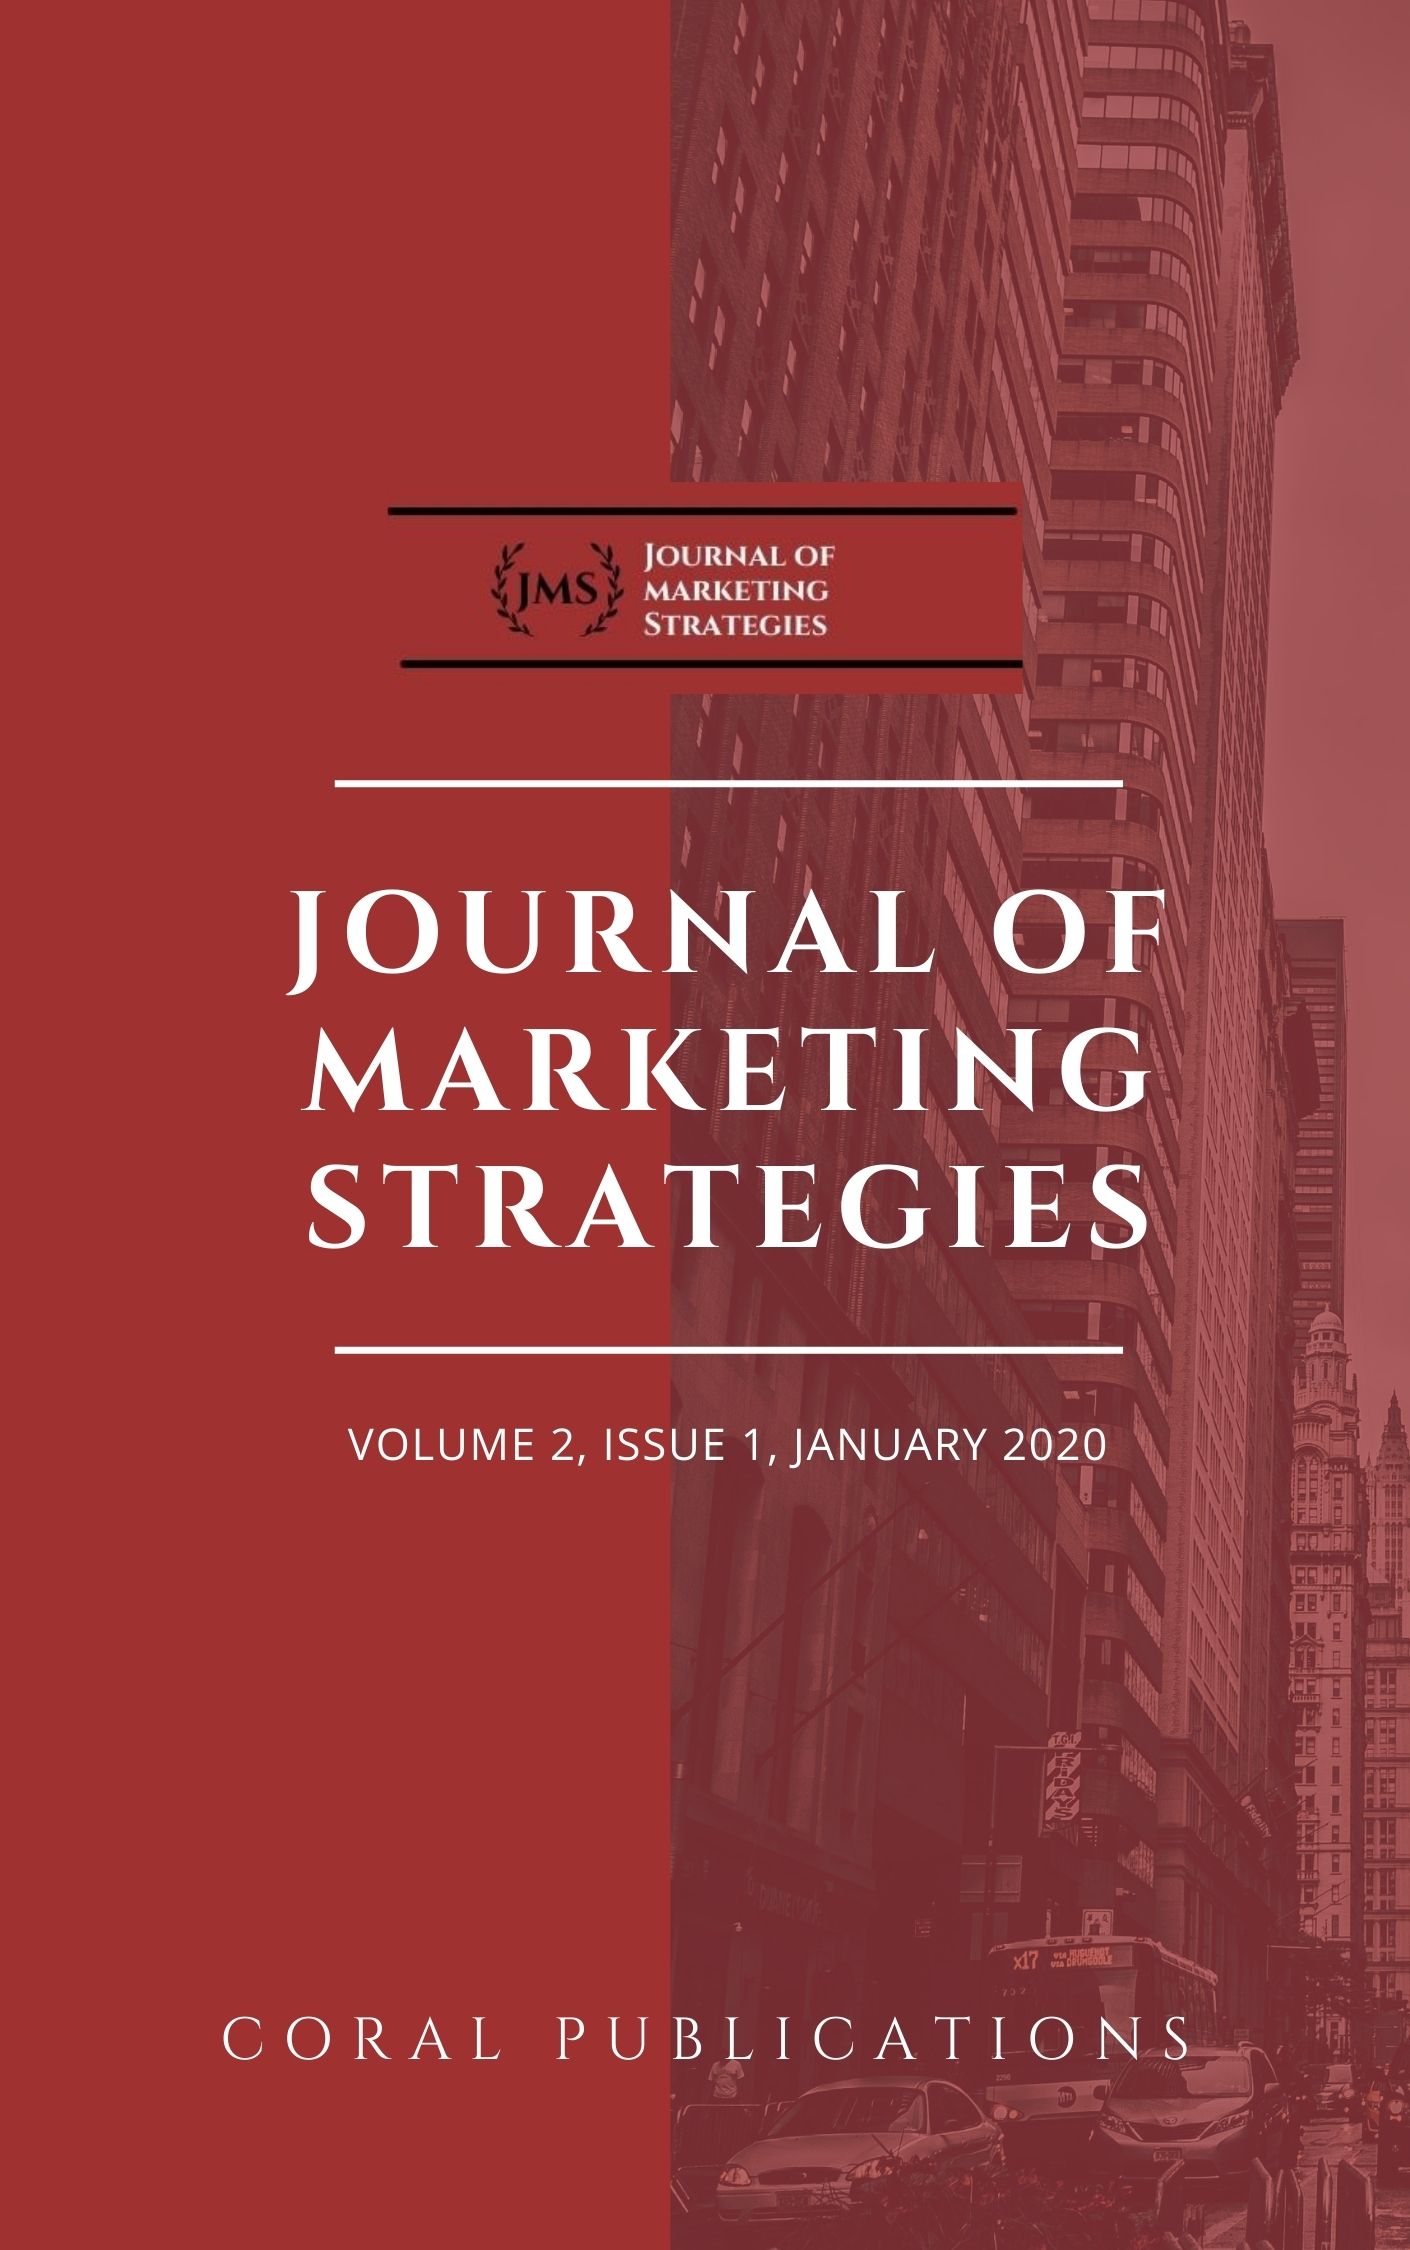 					View Vol. 2 No. 1 (2020): Journal of Marketing Strategies (Vol. 2, Issue 1) January 2020
				